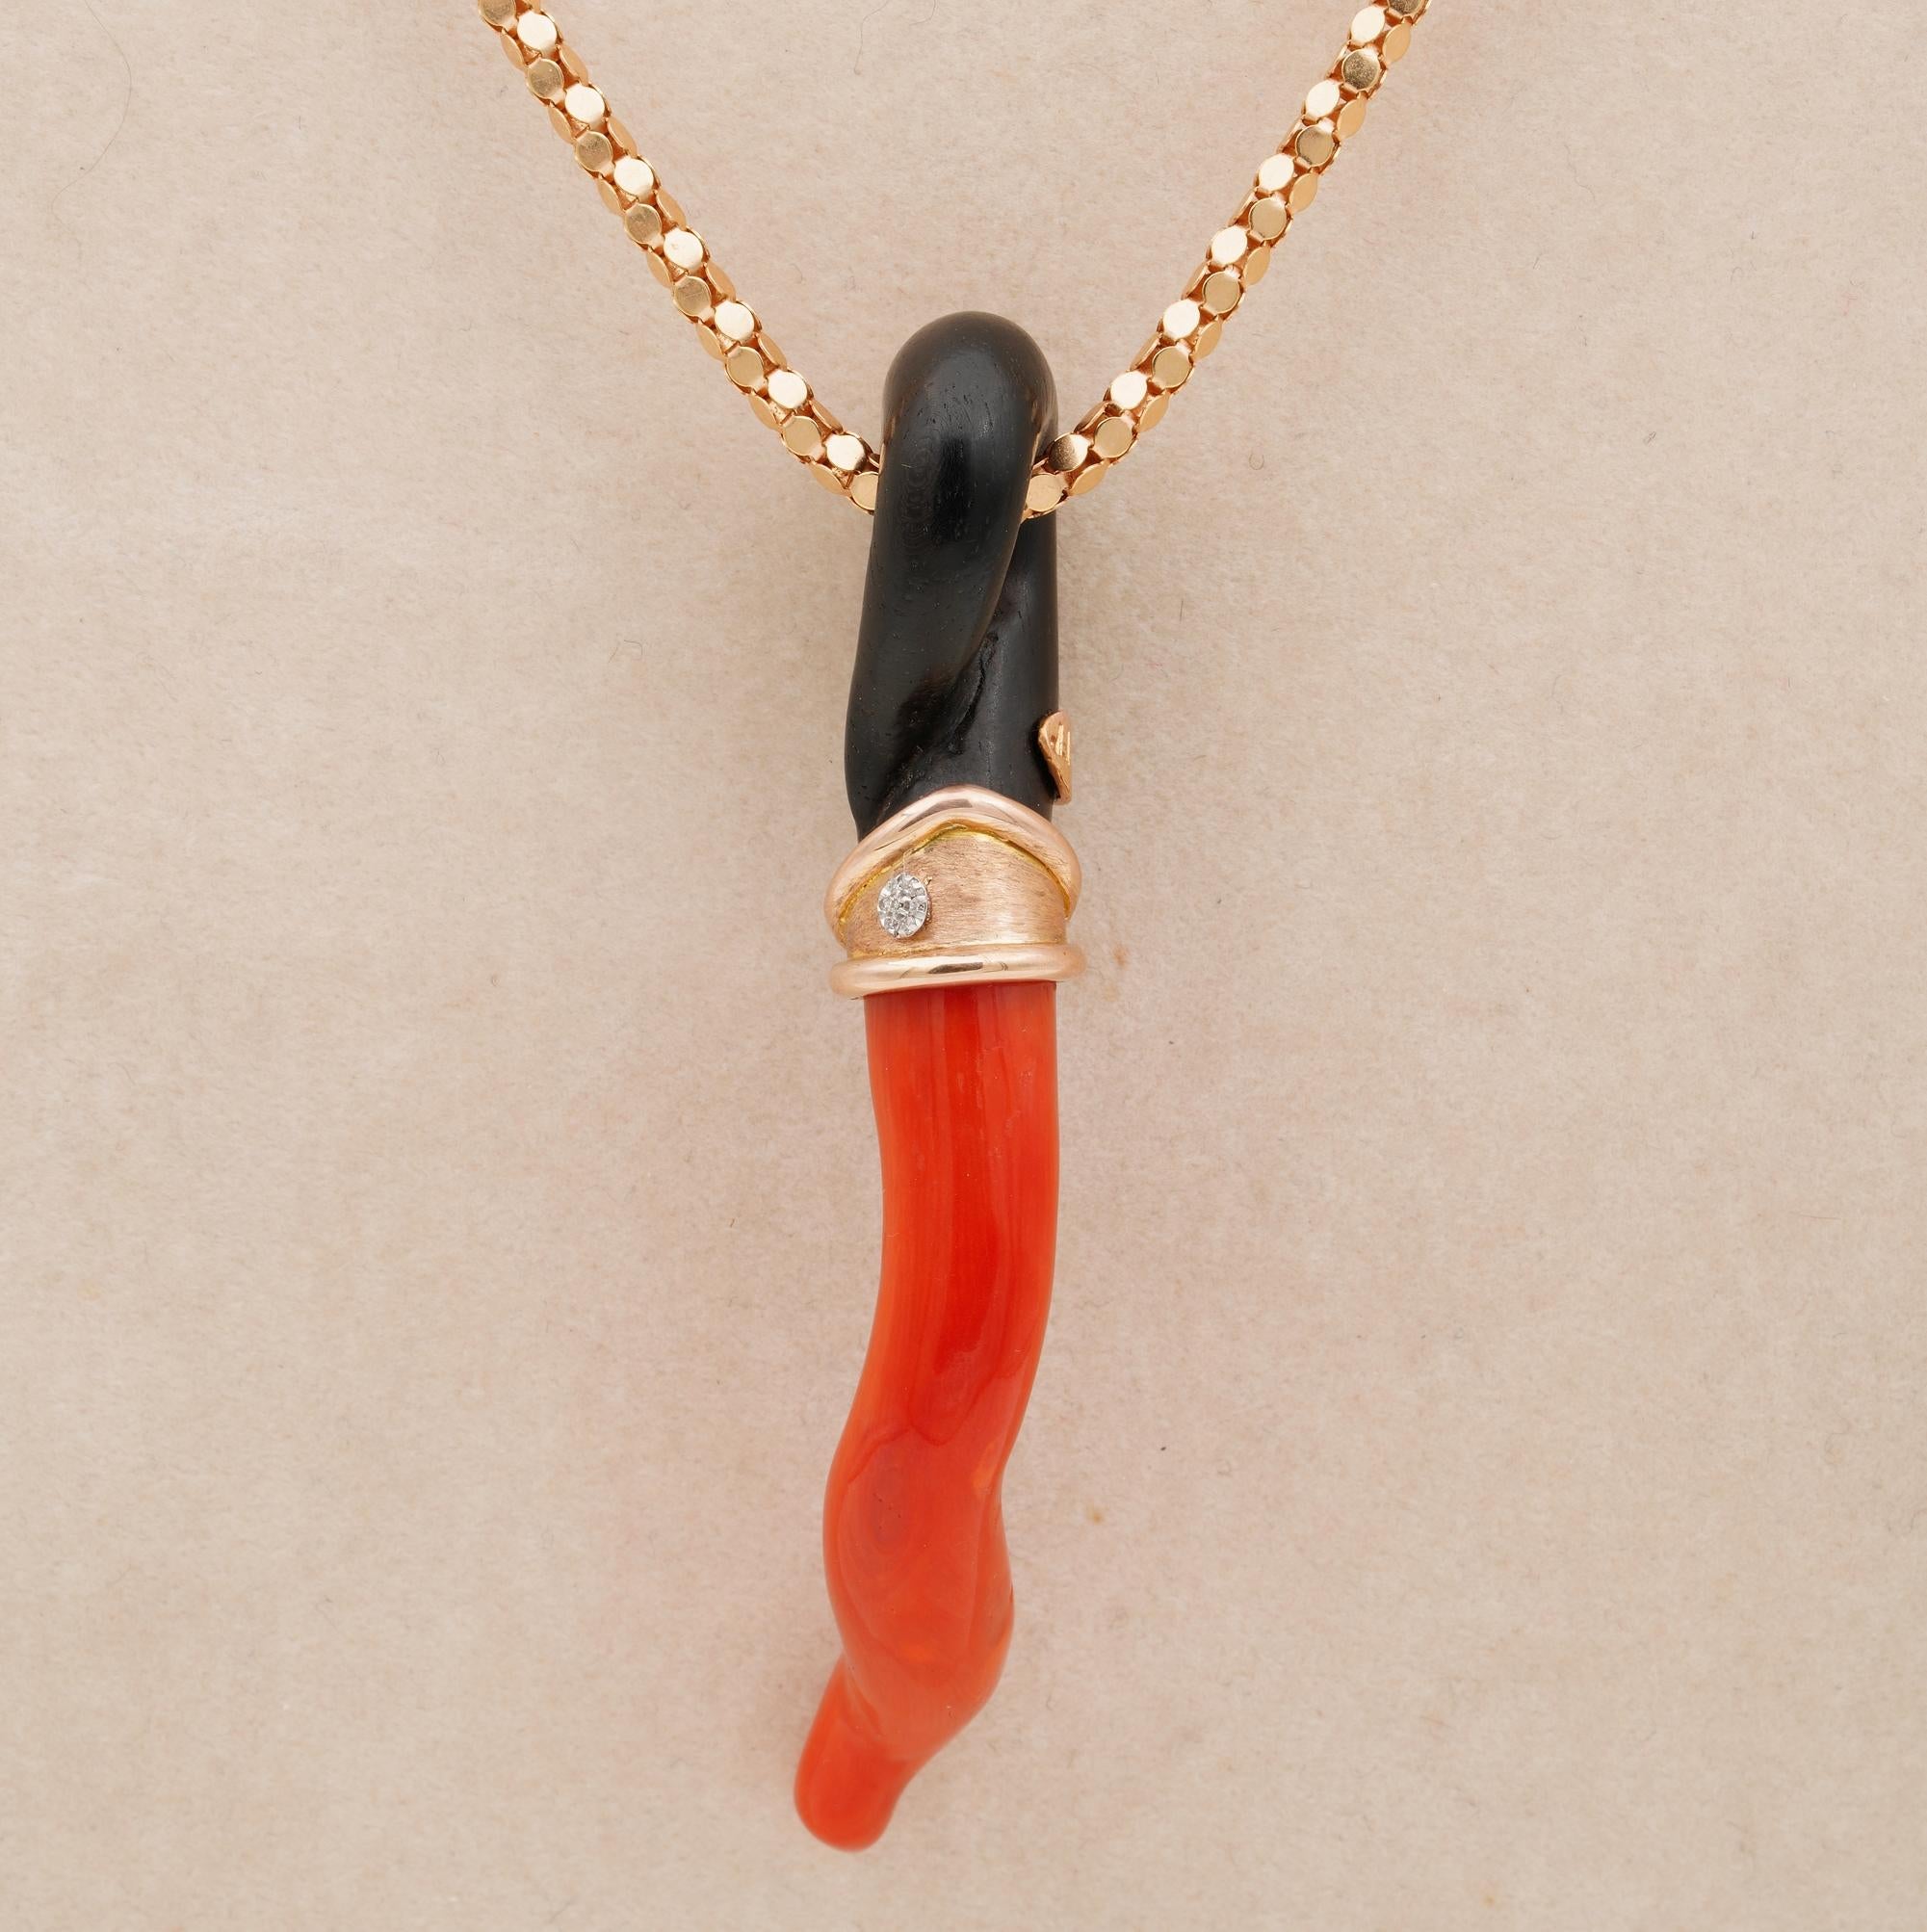 Precious Folk Art

Symbol of Fortune and protection against bad luck in life, the Cornicello is one of the oldest amulet in the man memory
Red Coral is the dearest Cornetto, ever loved as part of own's life and held for ever
Here is an unique